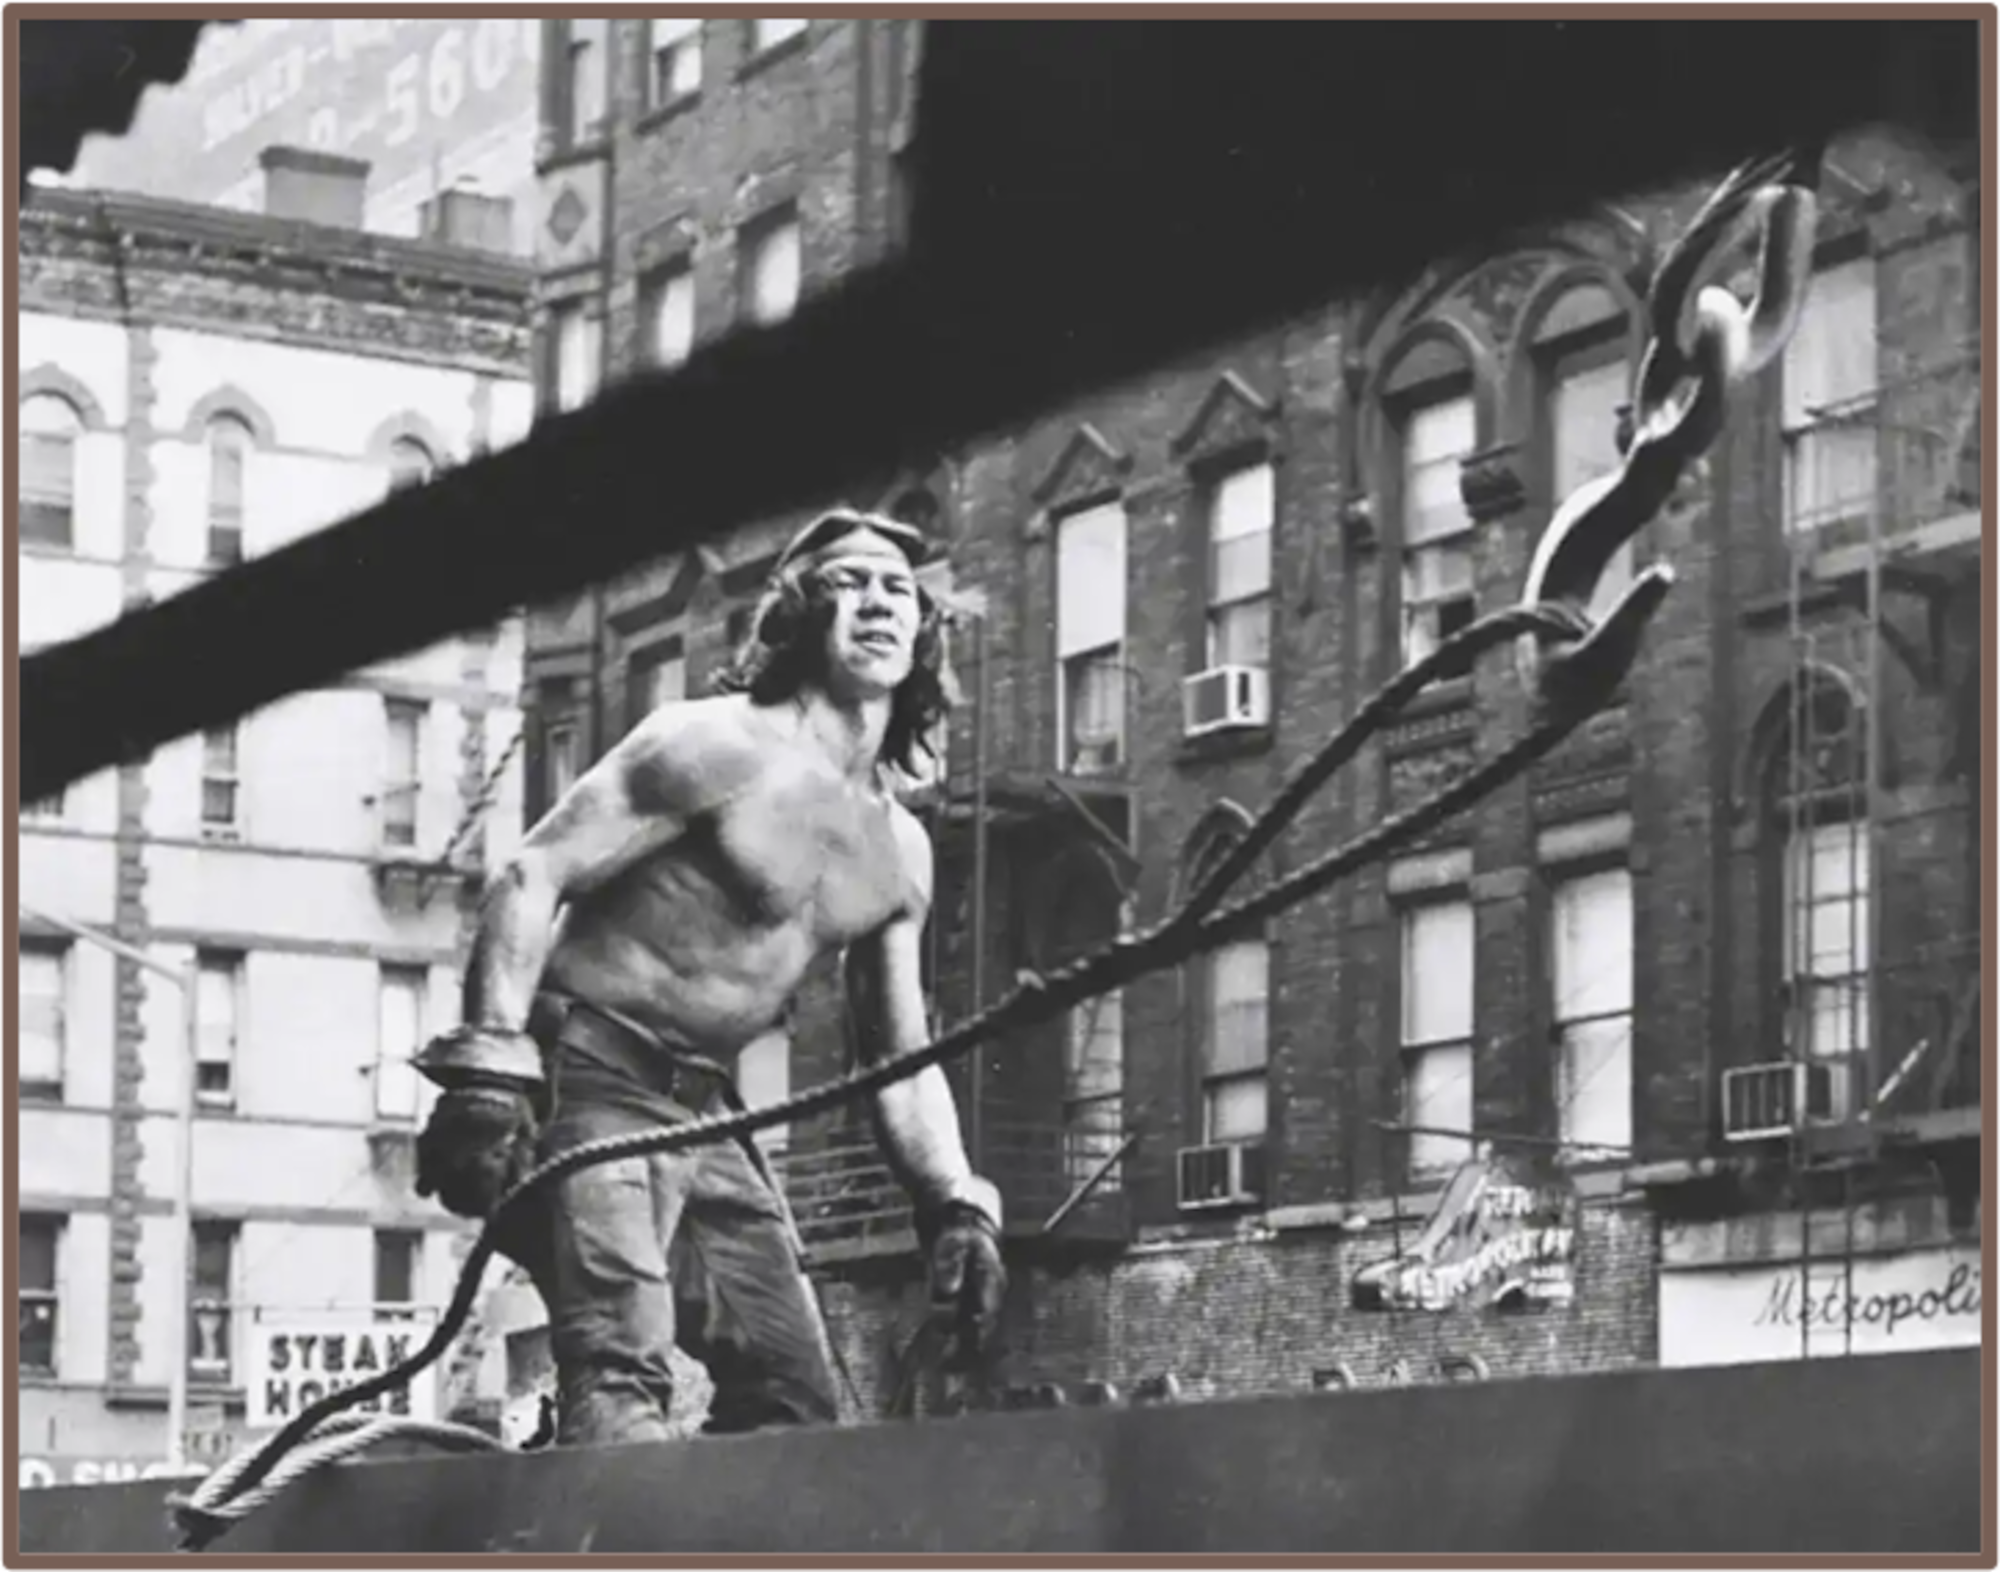 Black and white photo of a shirtless man working at a construction site.